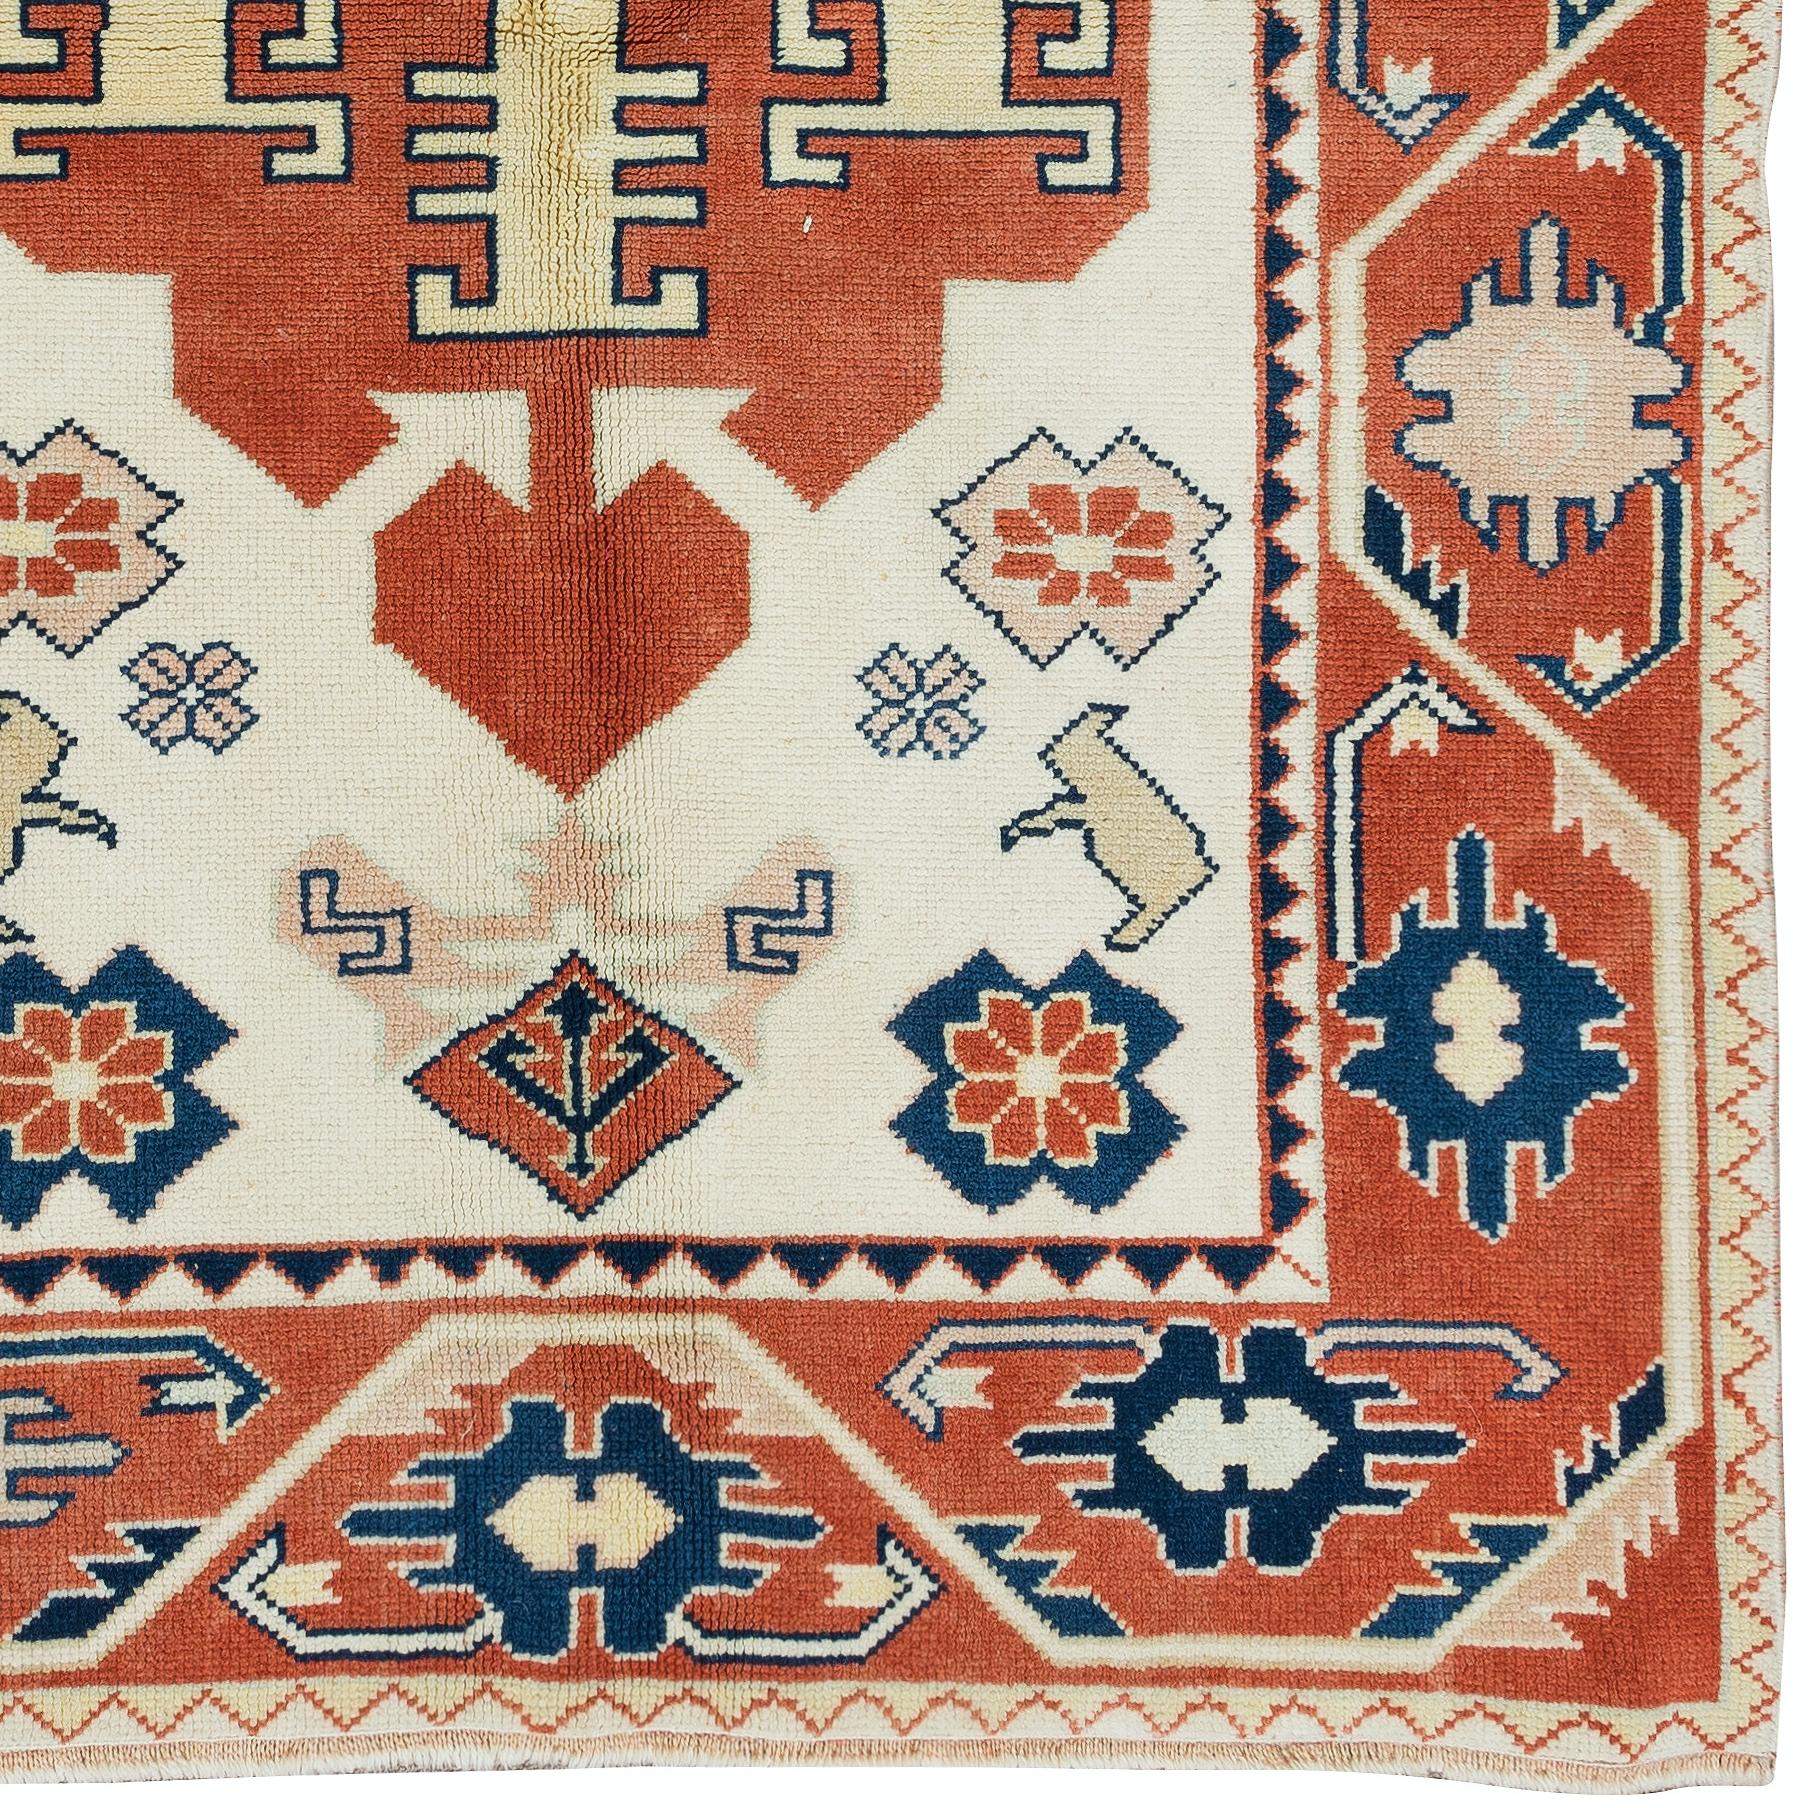 Contemporary 4x5.6 Ft Modern Handmade Geometric Turkish Rug in Cream, Red and Blue Colors For Sale